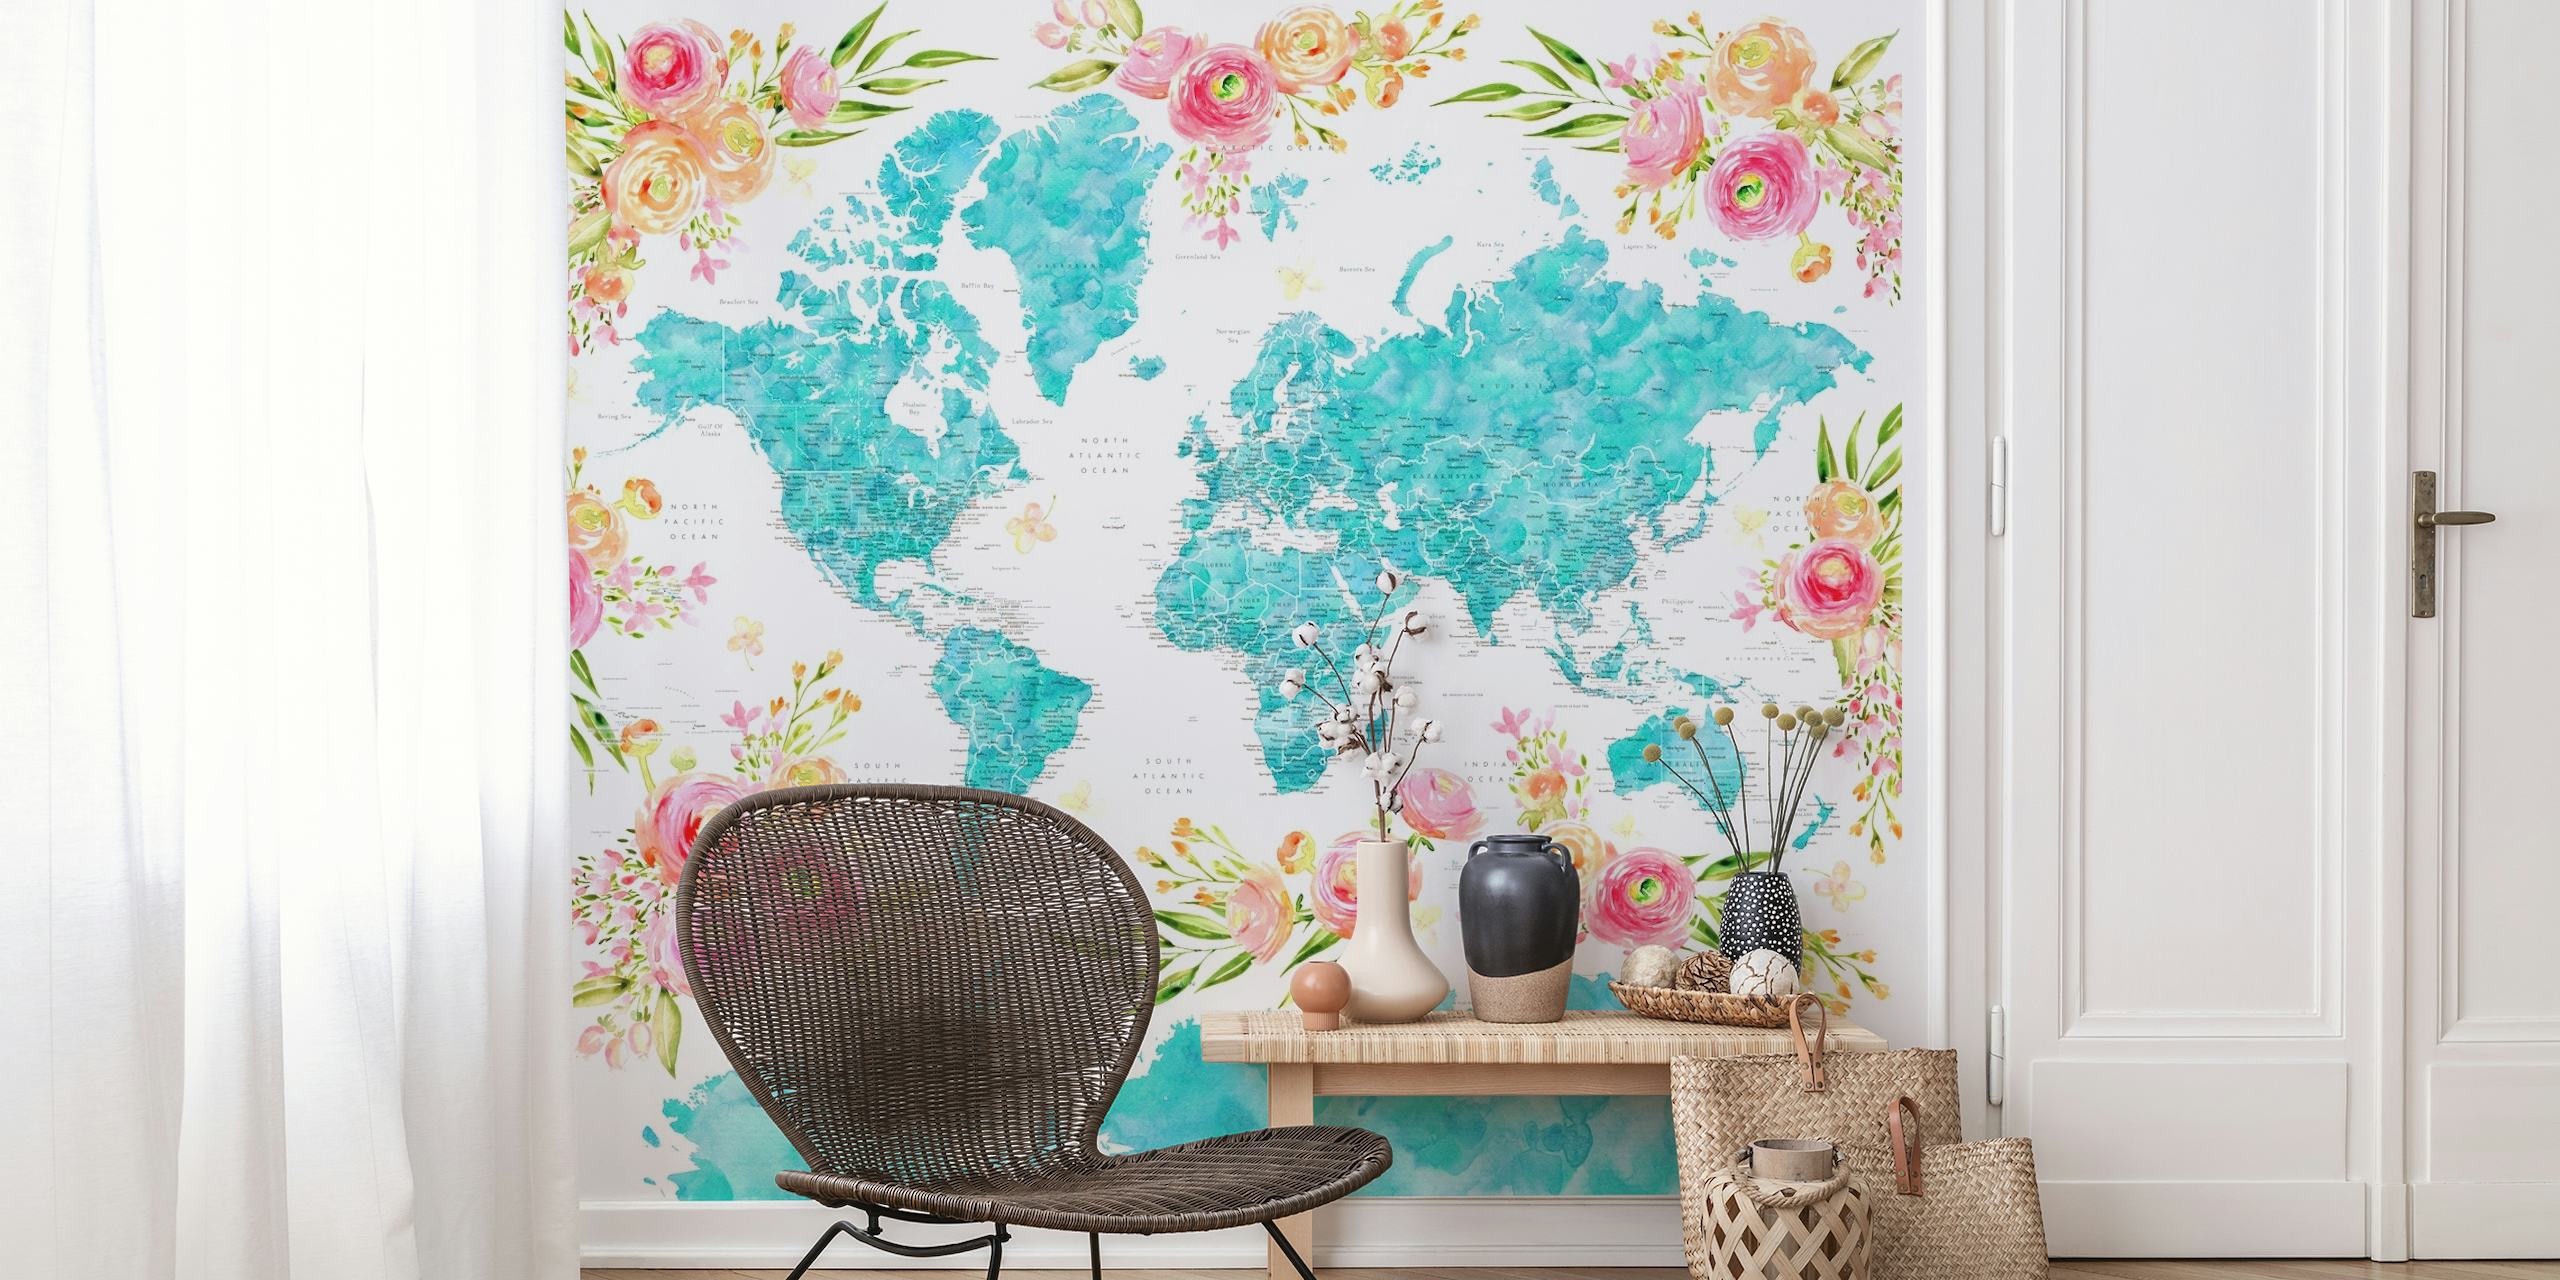 Colorful world map wall mural with floral patterns decorating the continents